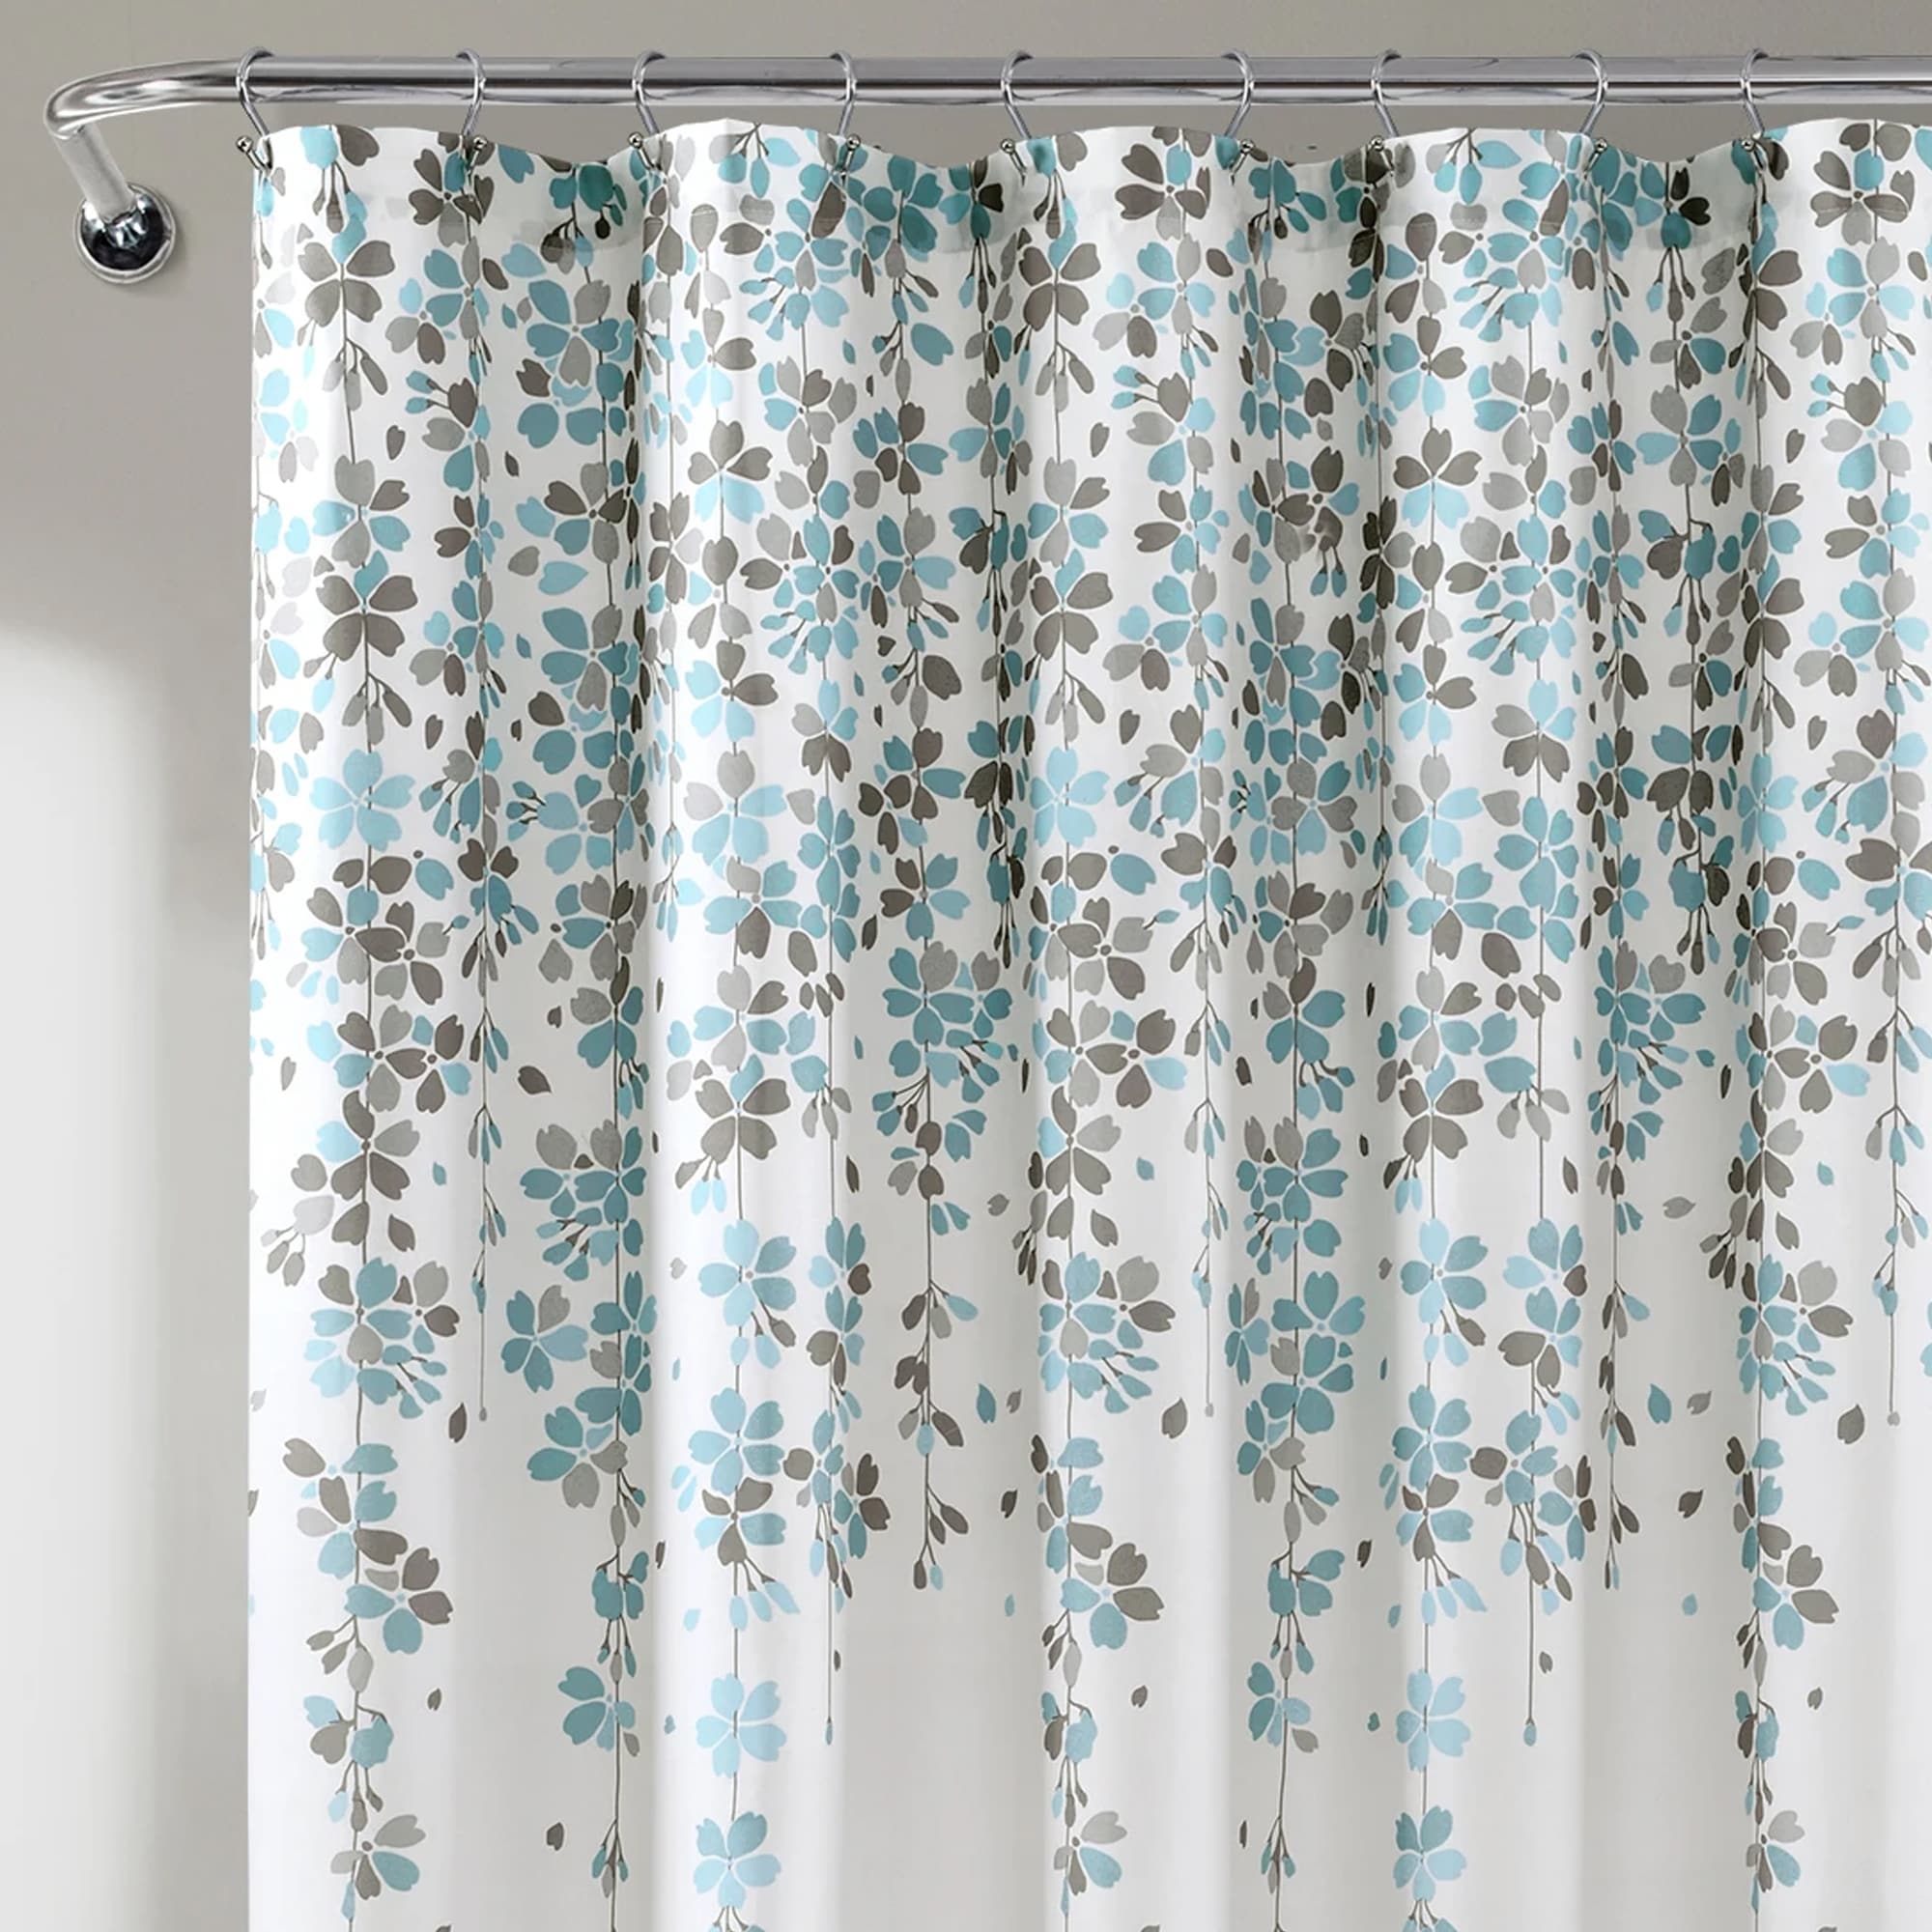 Rowley Shower Curtain-Floral Animal Bird Print Design 72" x 72" Blue and Gray 